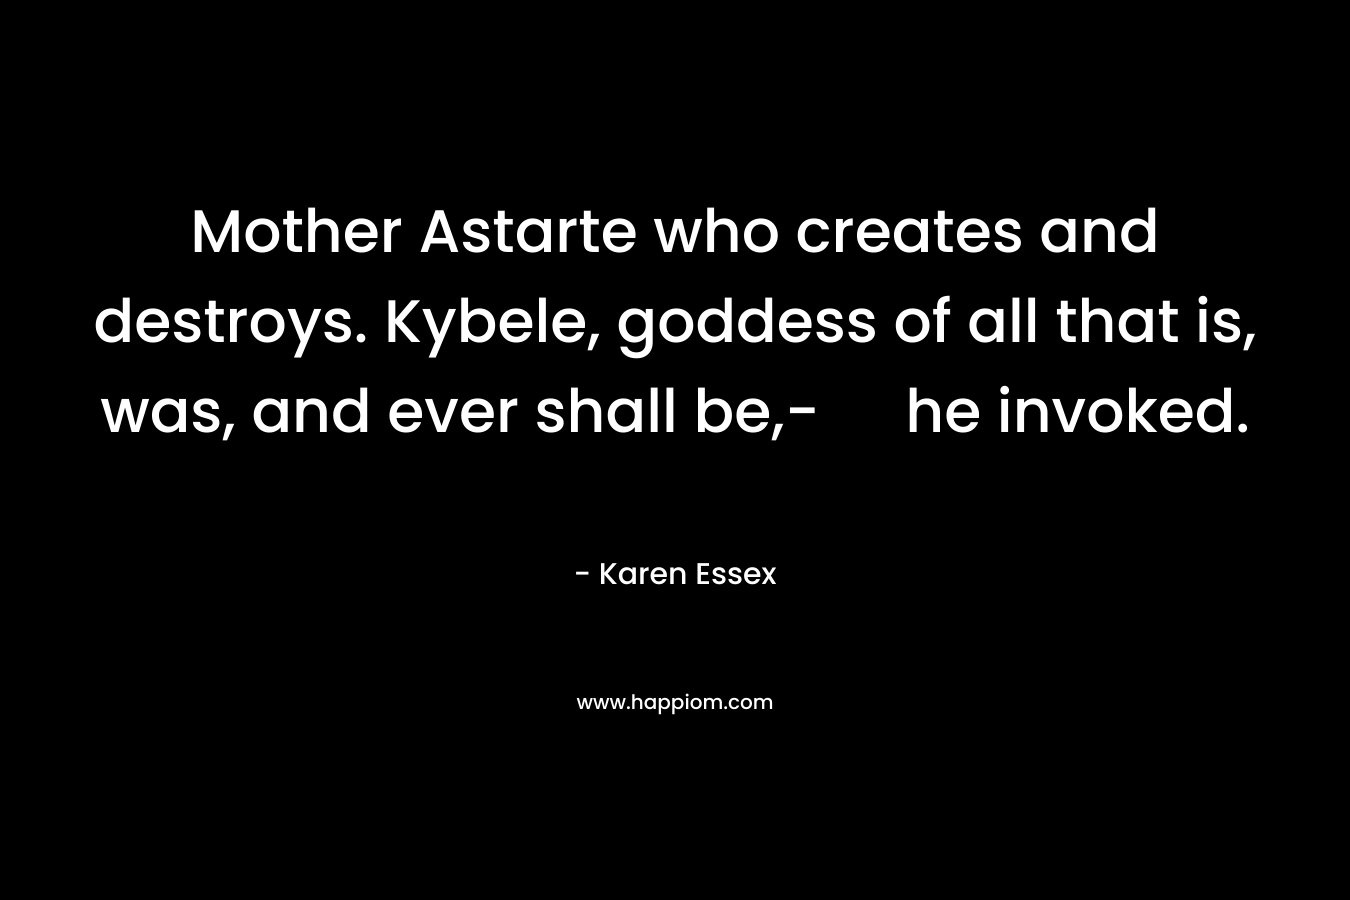 Mother Astarte who creates and destroys. Kybele, goddess of all that is, was, and ever shall be,- he invoked. – Karen Essex